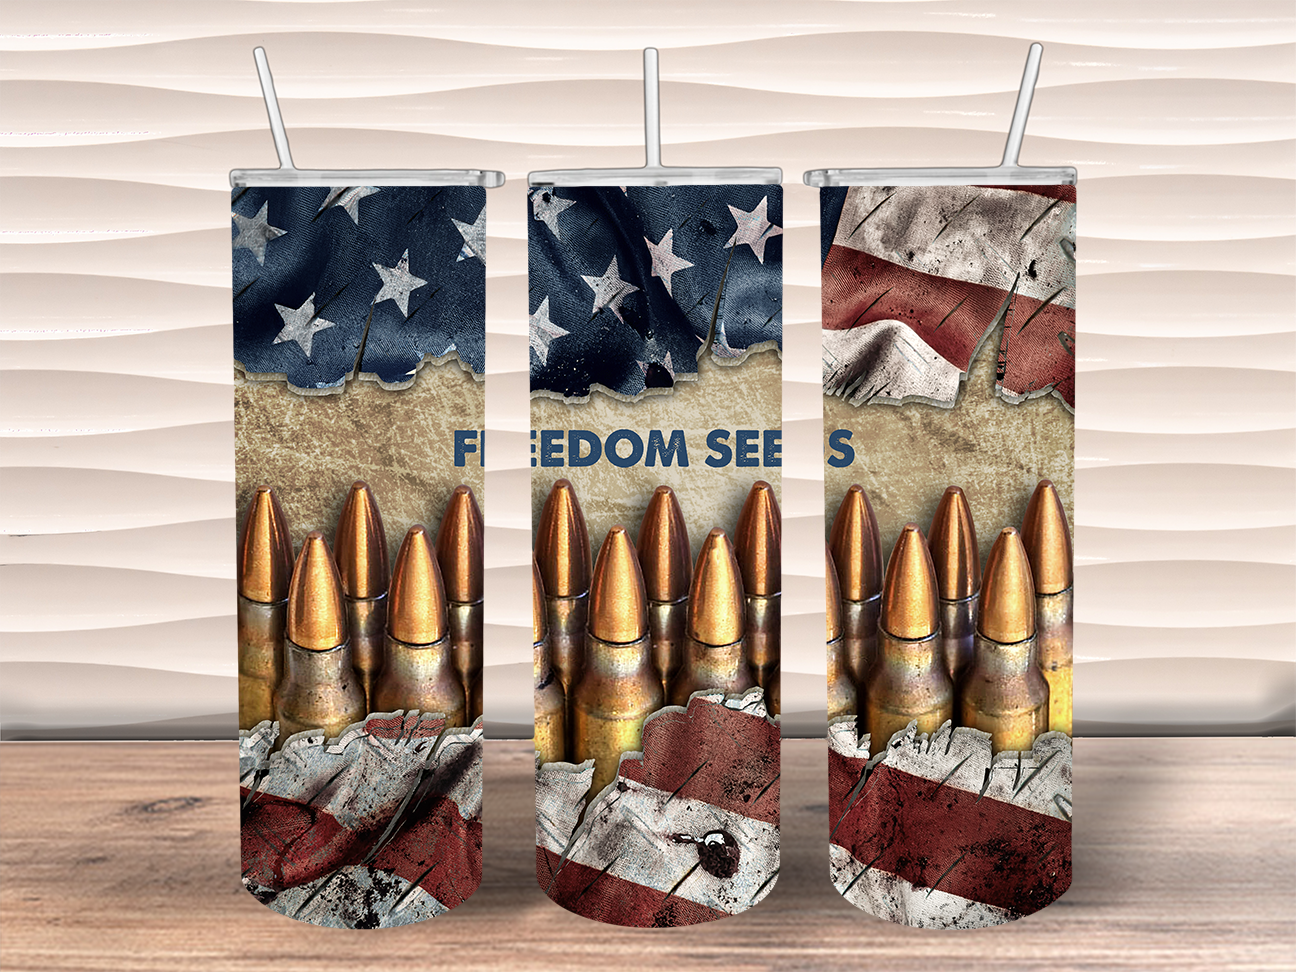 20 oz. Straight Sided Tumblers Guns And Accessories Freedom Seeds Cracked Wood Ammo Bullets